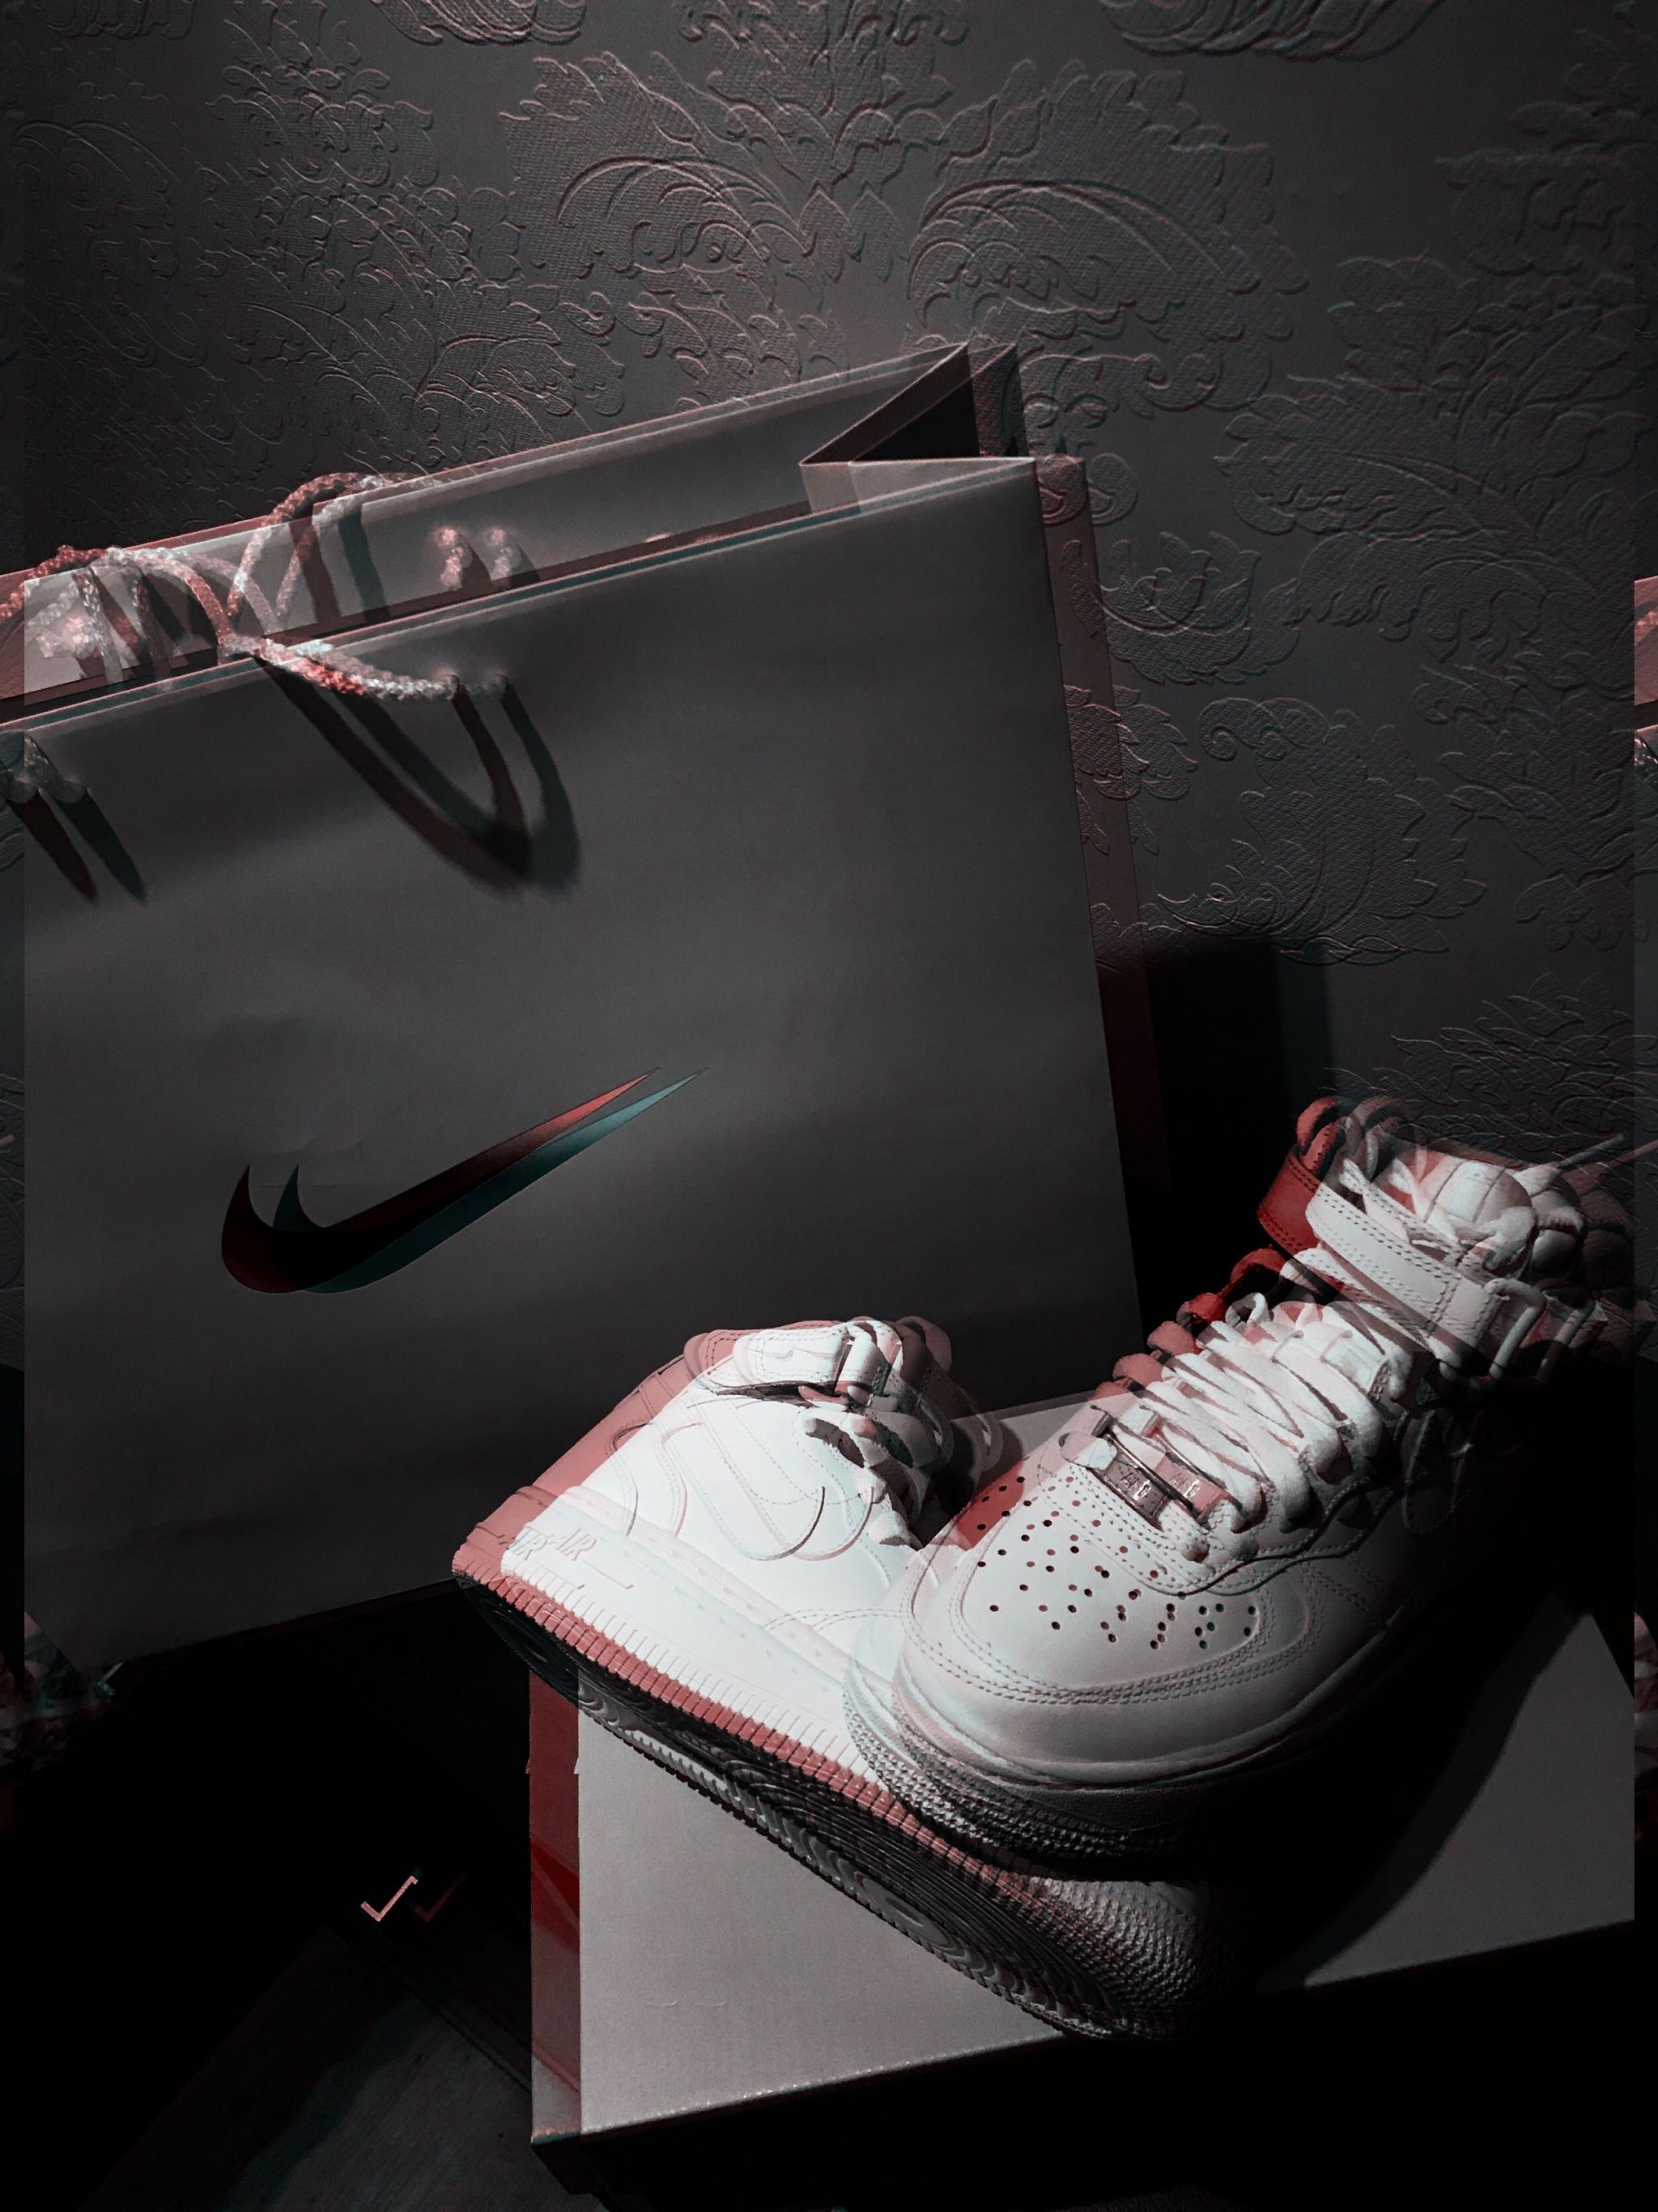 Free download nike air force 1 Wallpaper Combat boots Streetwear [2508x3344] for your Desktop, Mobile & Tablet. Explore Nike Lunar Force Wallpaper. Nike Lunar Force Wallpaper, Nike Air Force